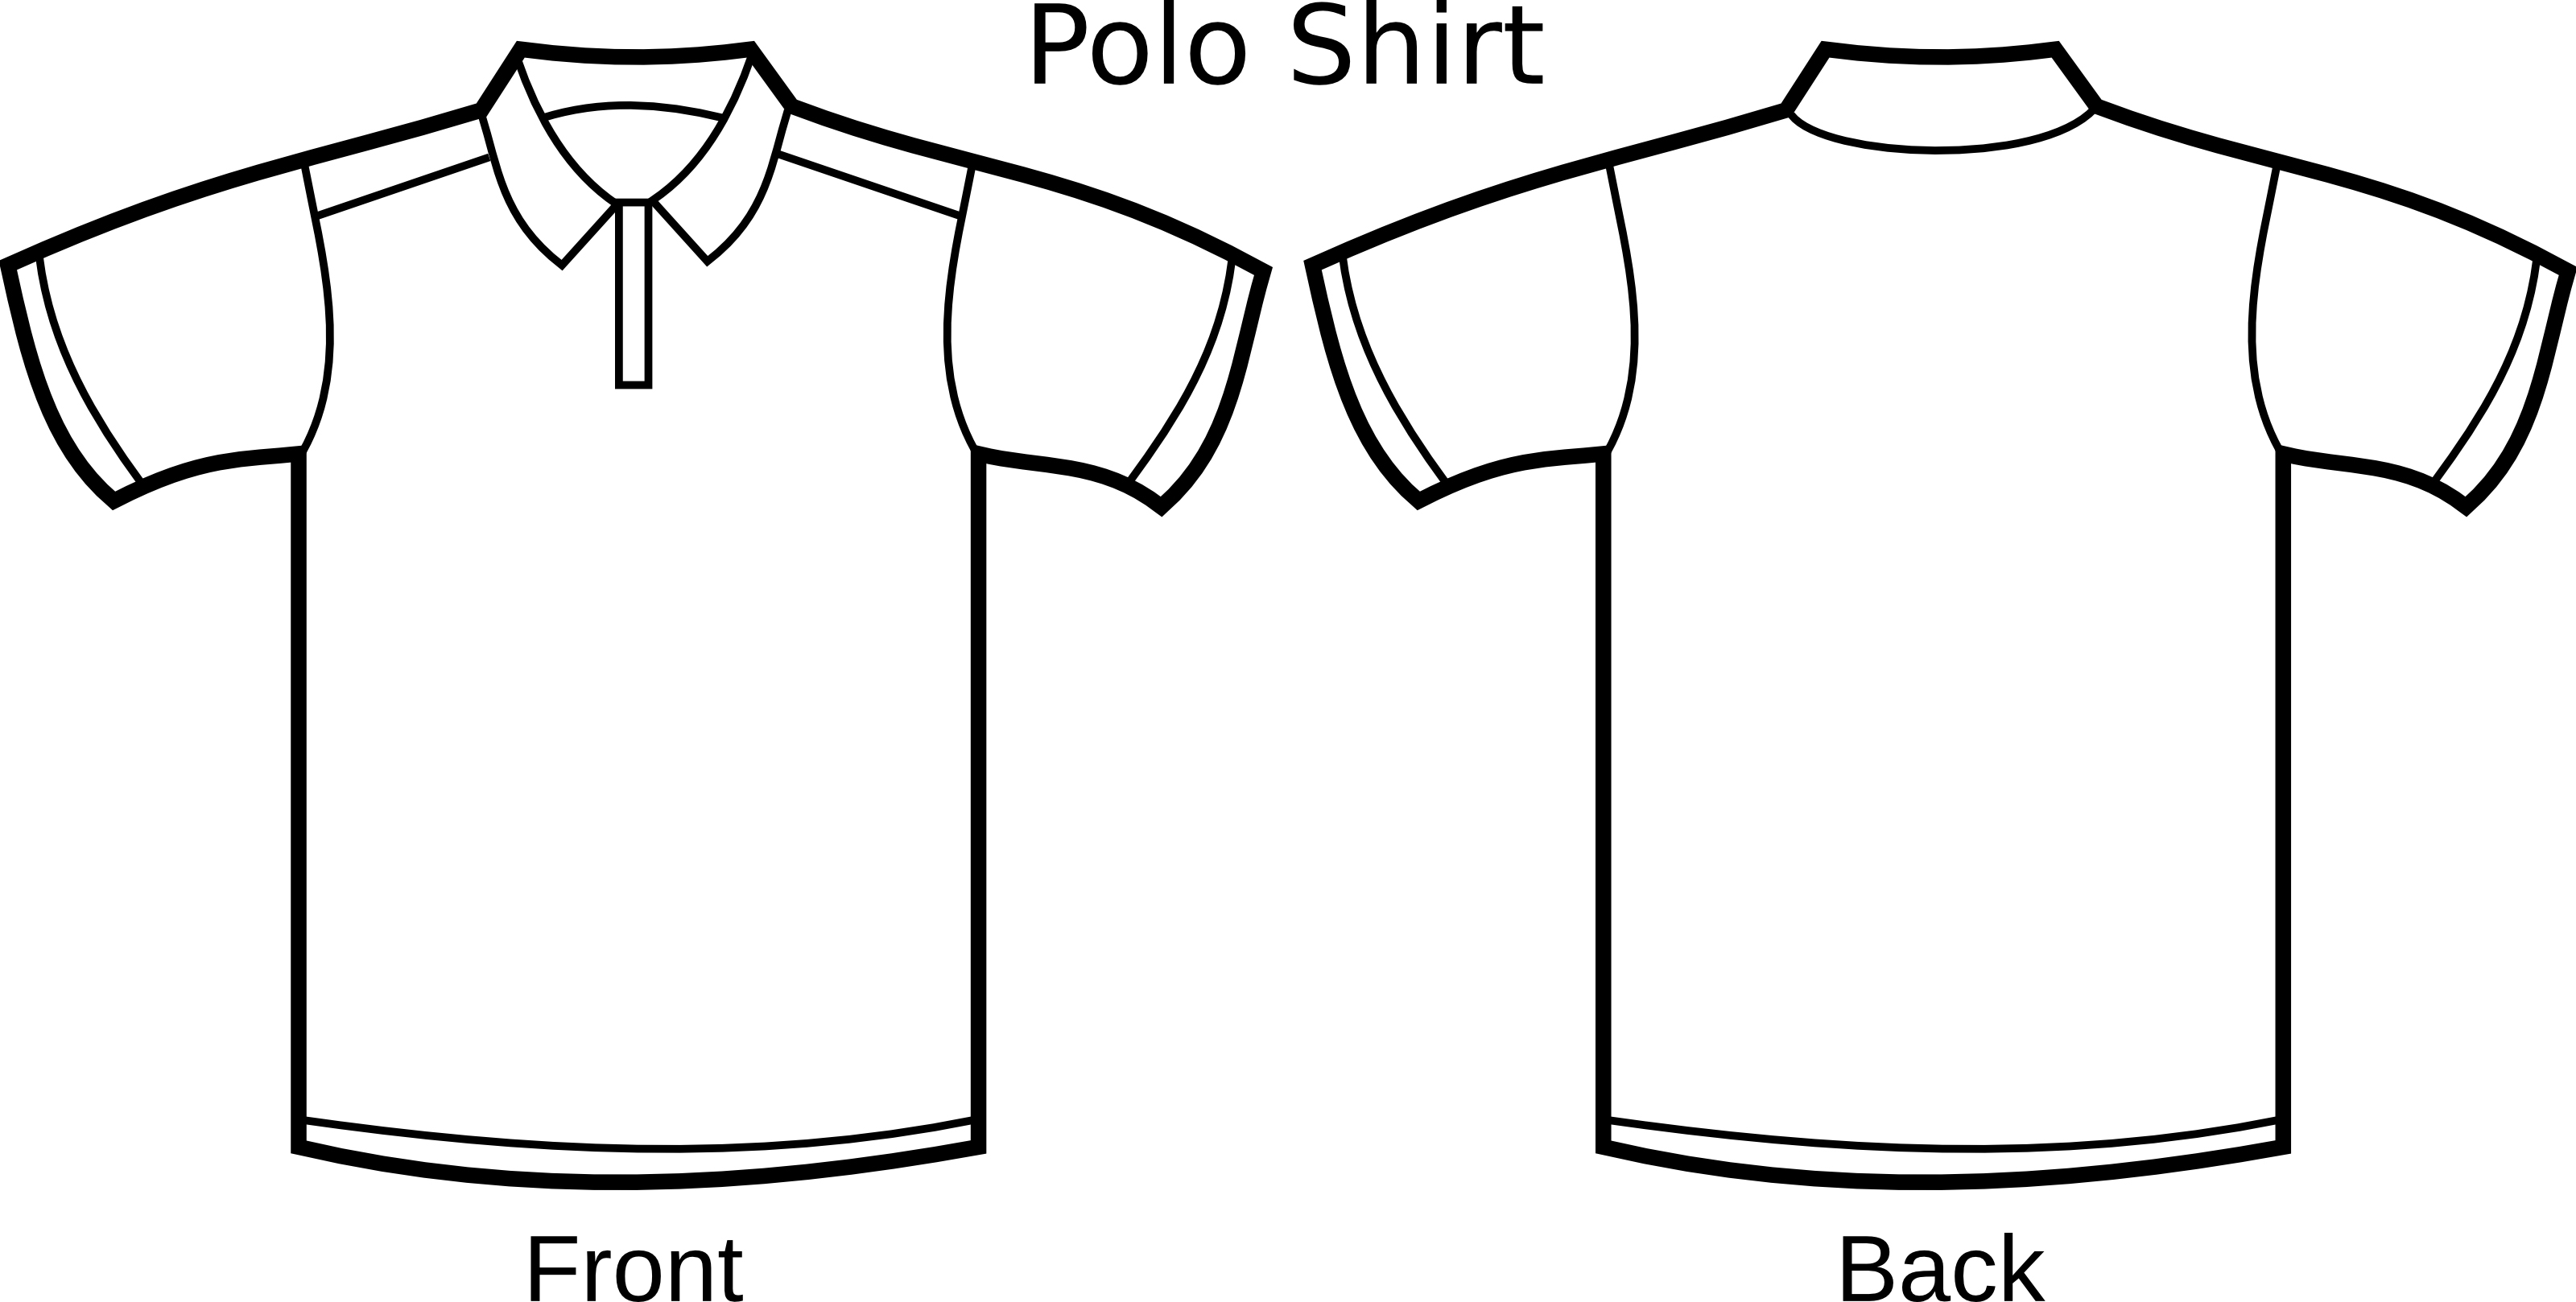 Free Polo Shirt Template Clipart Illustration   Free Images At Clker